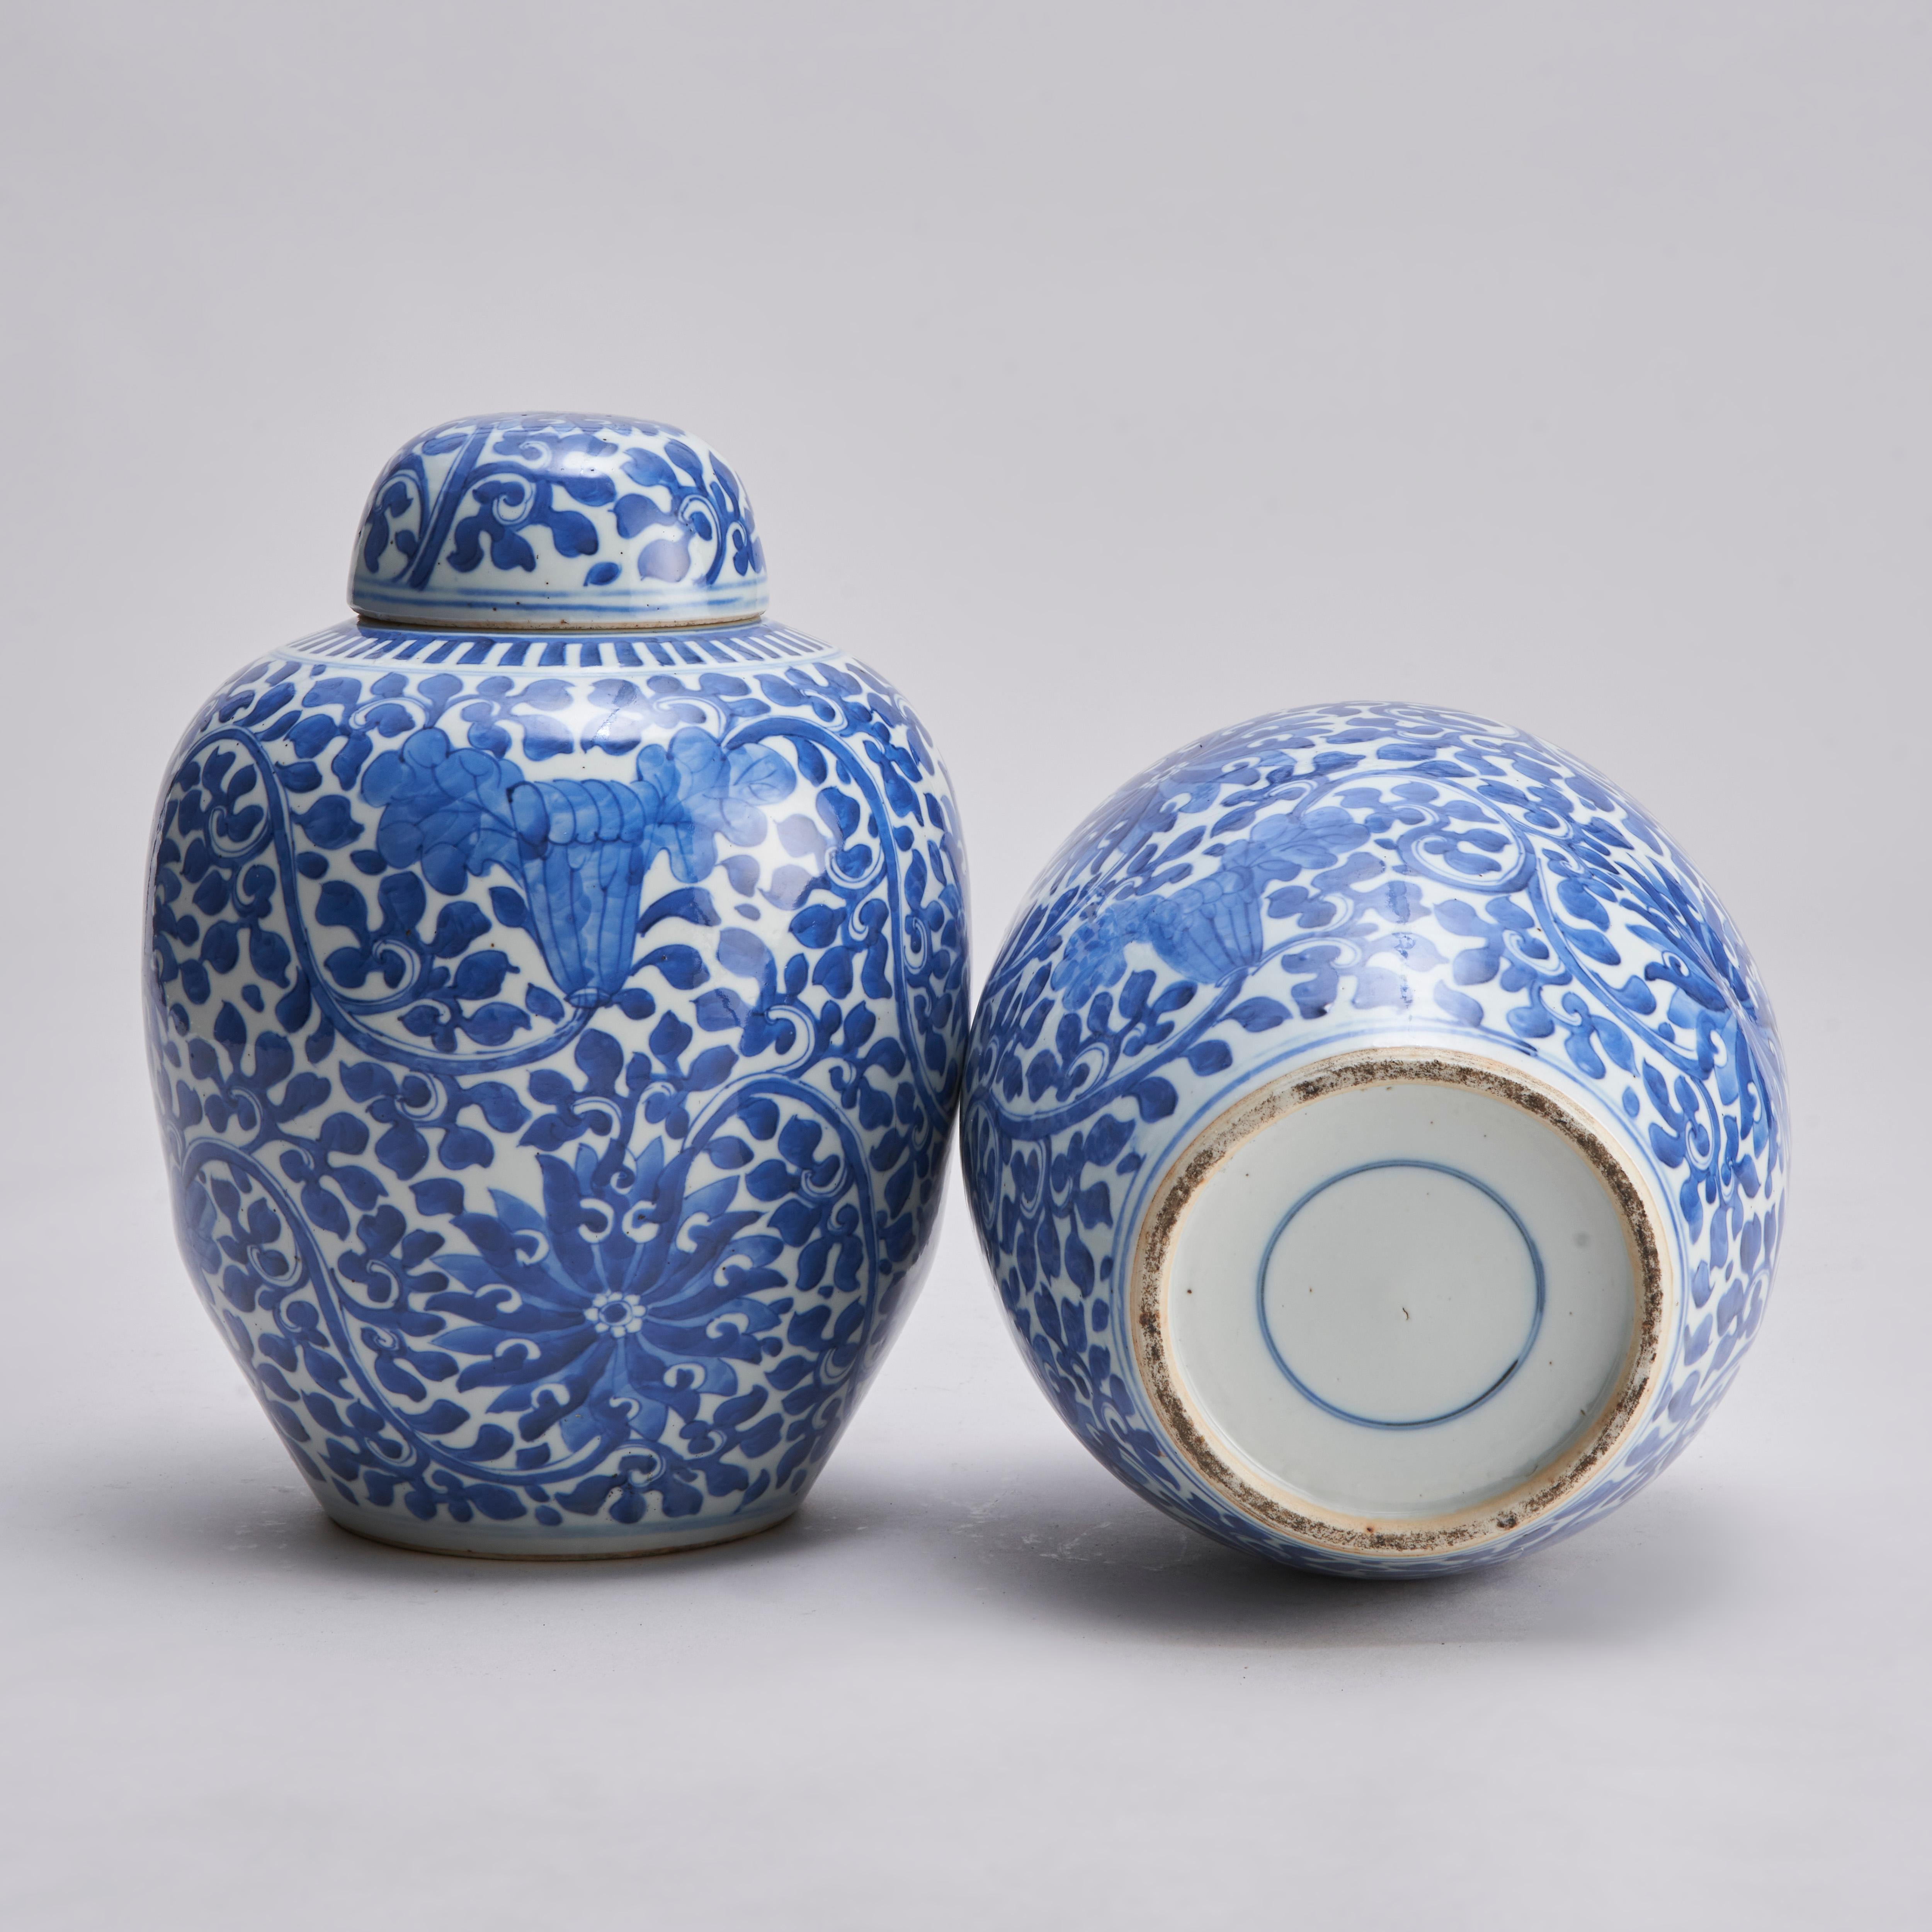 A pair of covered porcelain jars with blue and white decoration For Sale 6